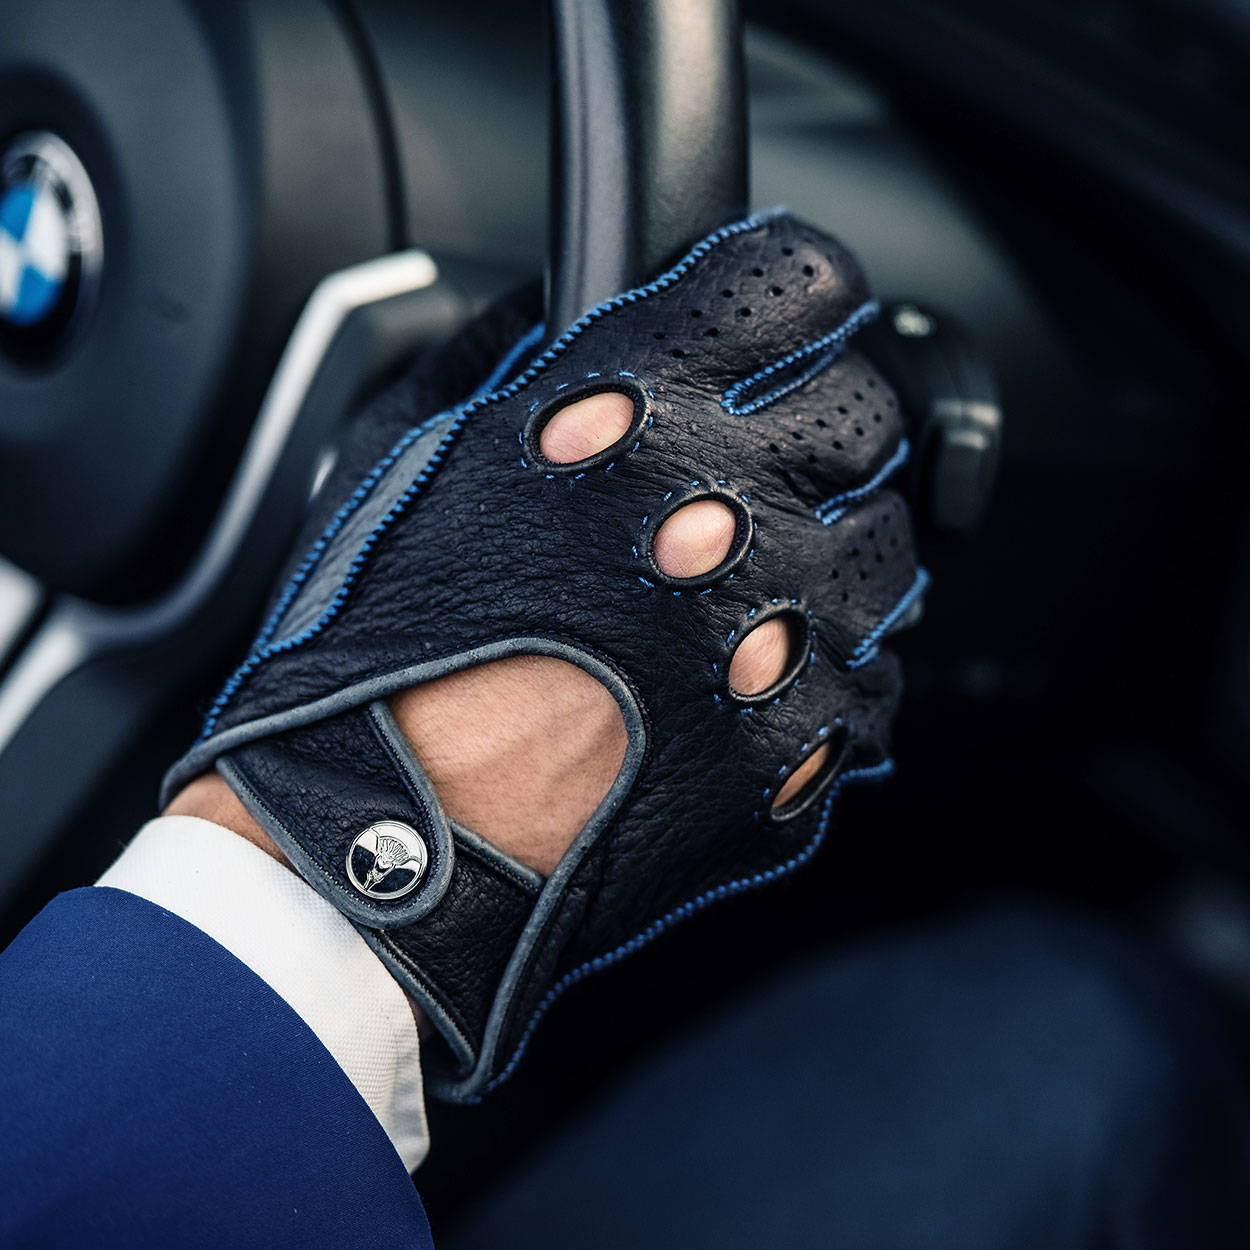 Blue leather driving gloves